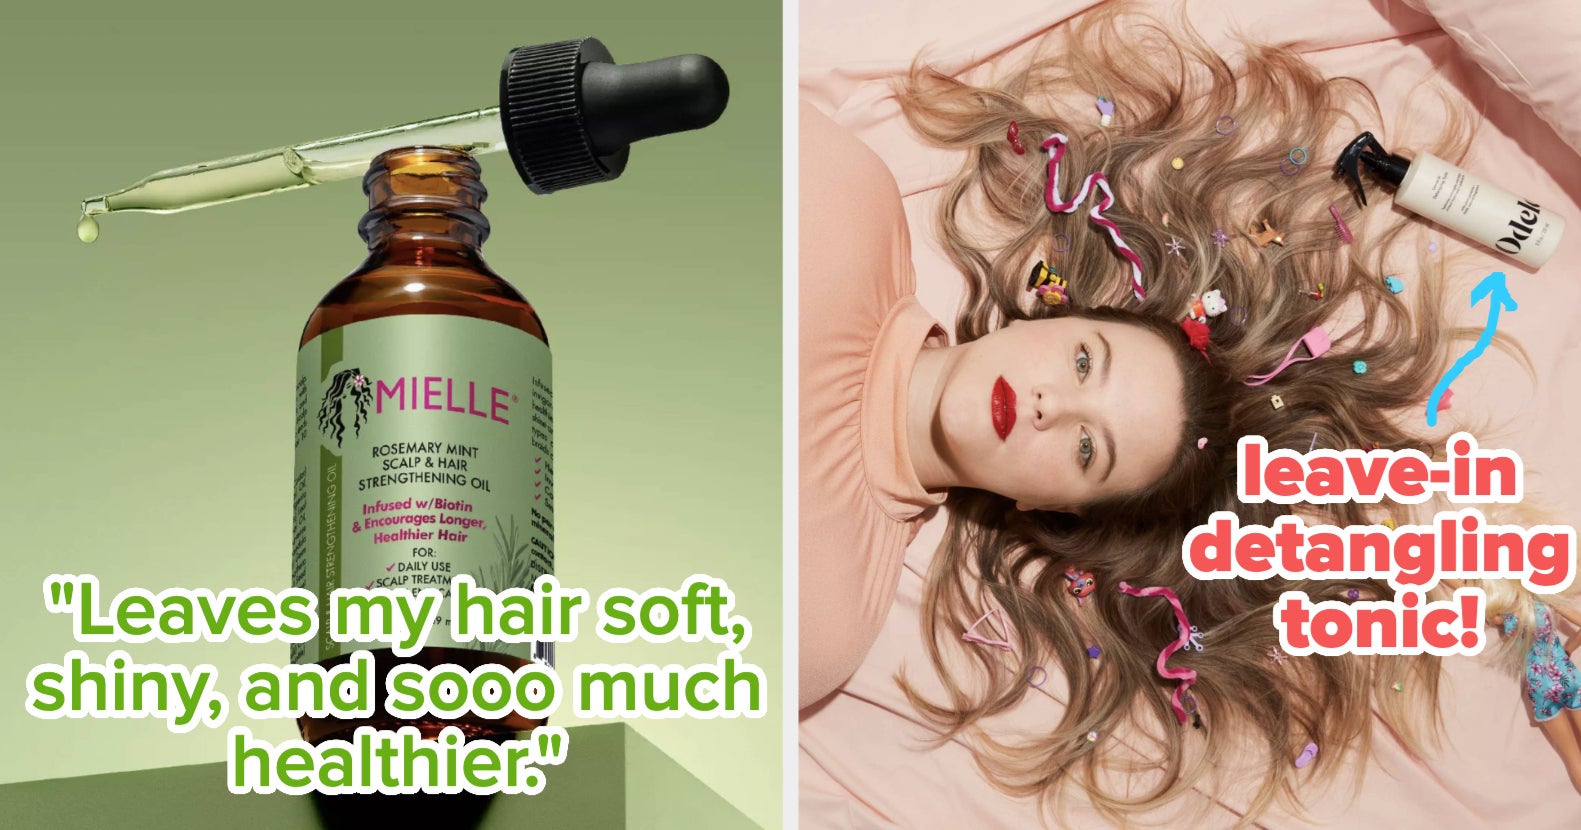 Target Introduces 20 Haircare Products for Haters